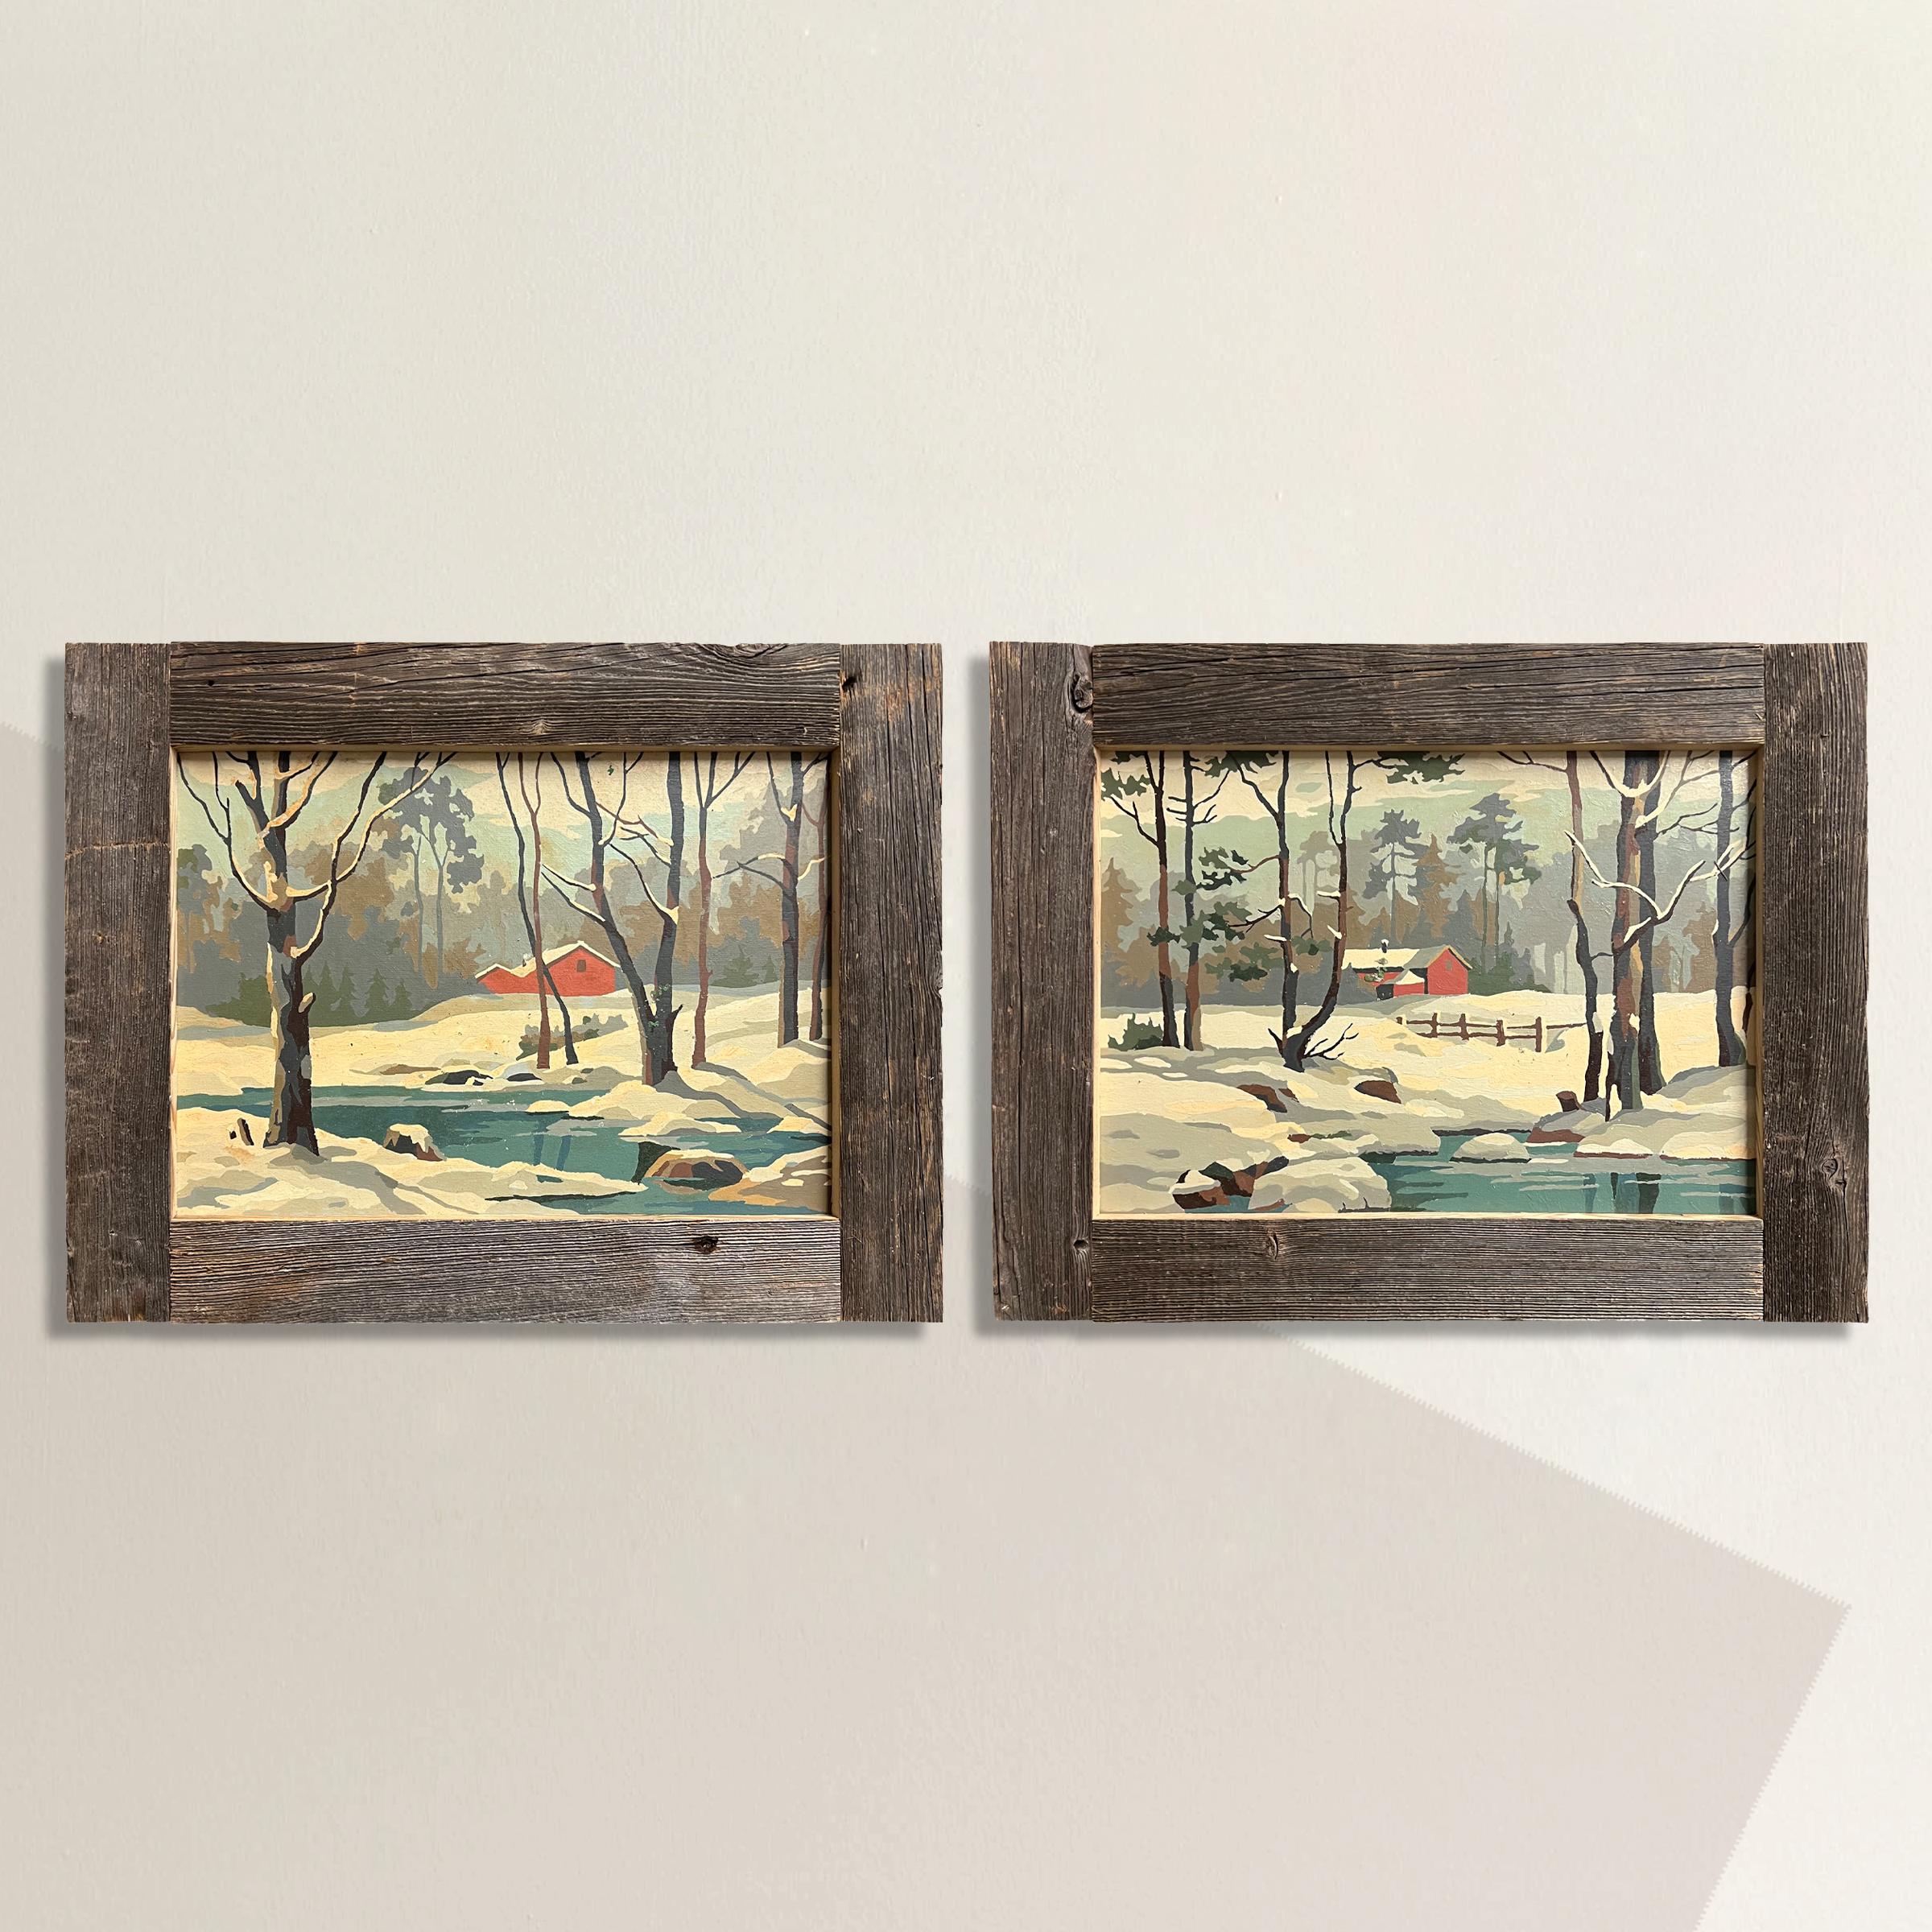 Embark on a visual journey with this pair of mid-20th century American paint-by-number paintings, each capturing the serene beauty of a winter landscape. Each scene features a red barn nestled amid snow-covered surroundings, with a gentle creek in